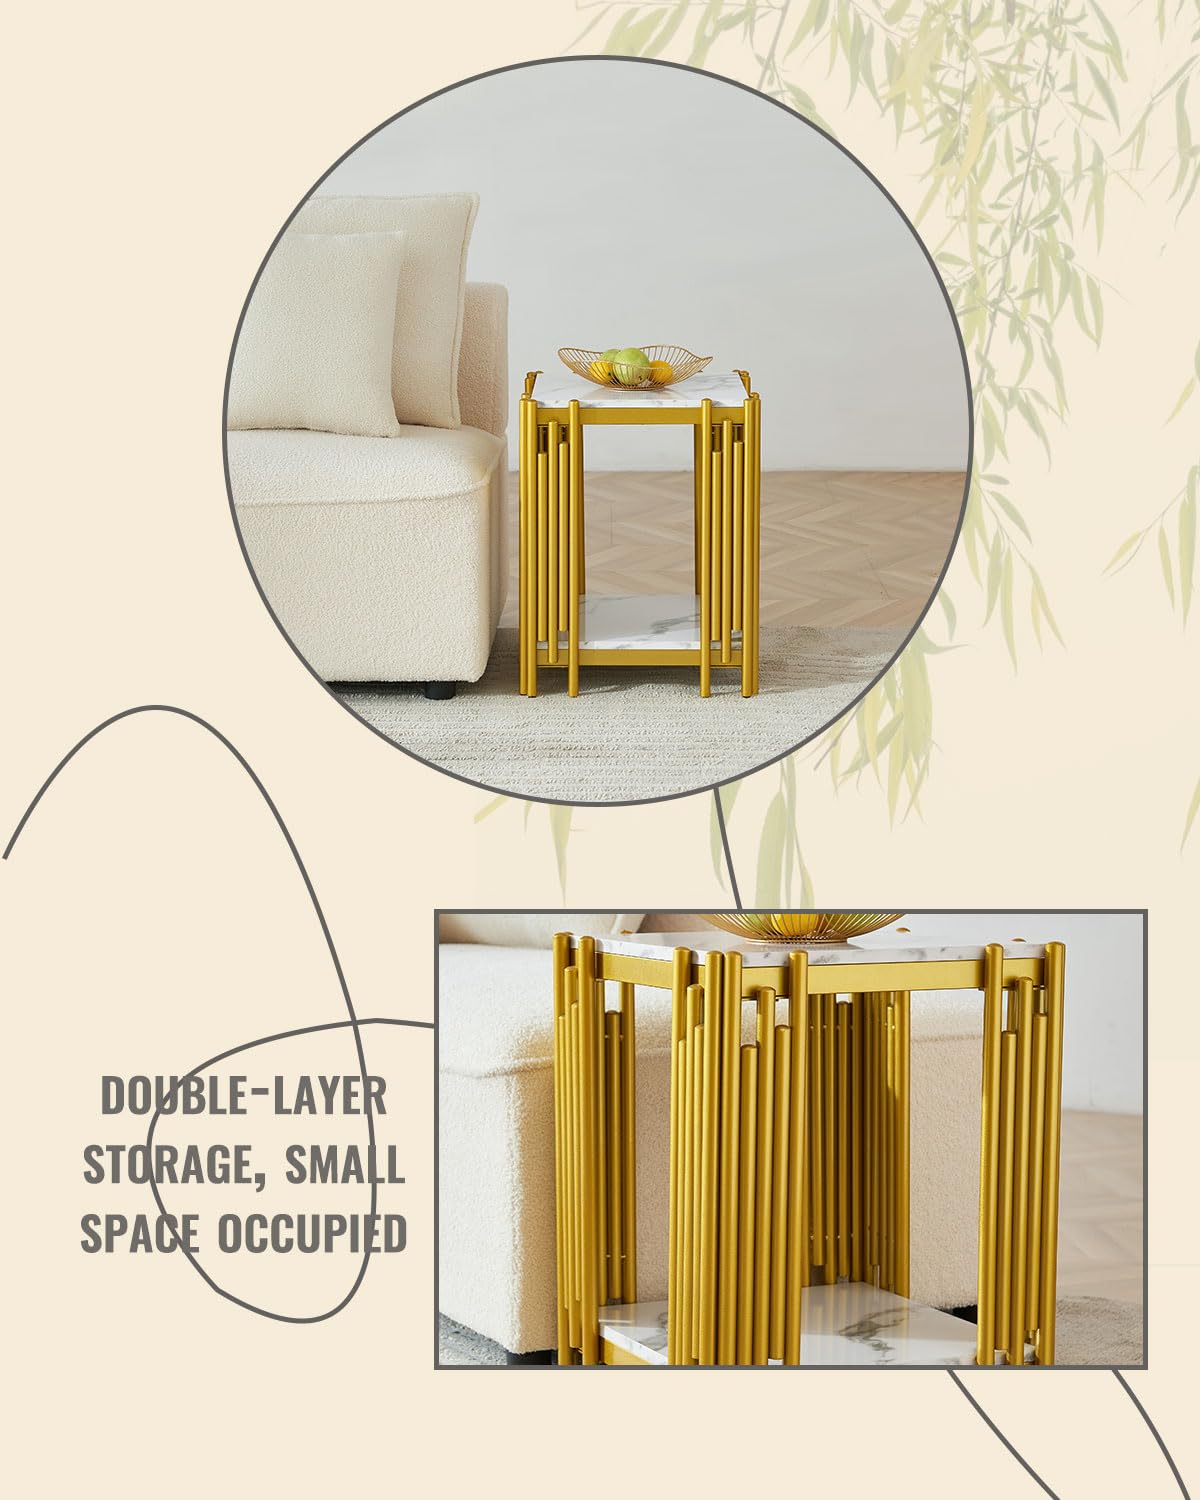 BHWXXMM End Tables,Small Living Room Side Table,Metal Sofa Table,Telephone Tables,with Metal Frame for Living Room,Bedroom,Small Spaces,Gold